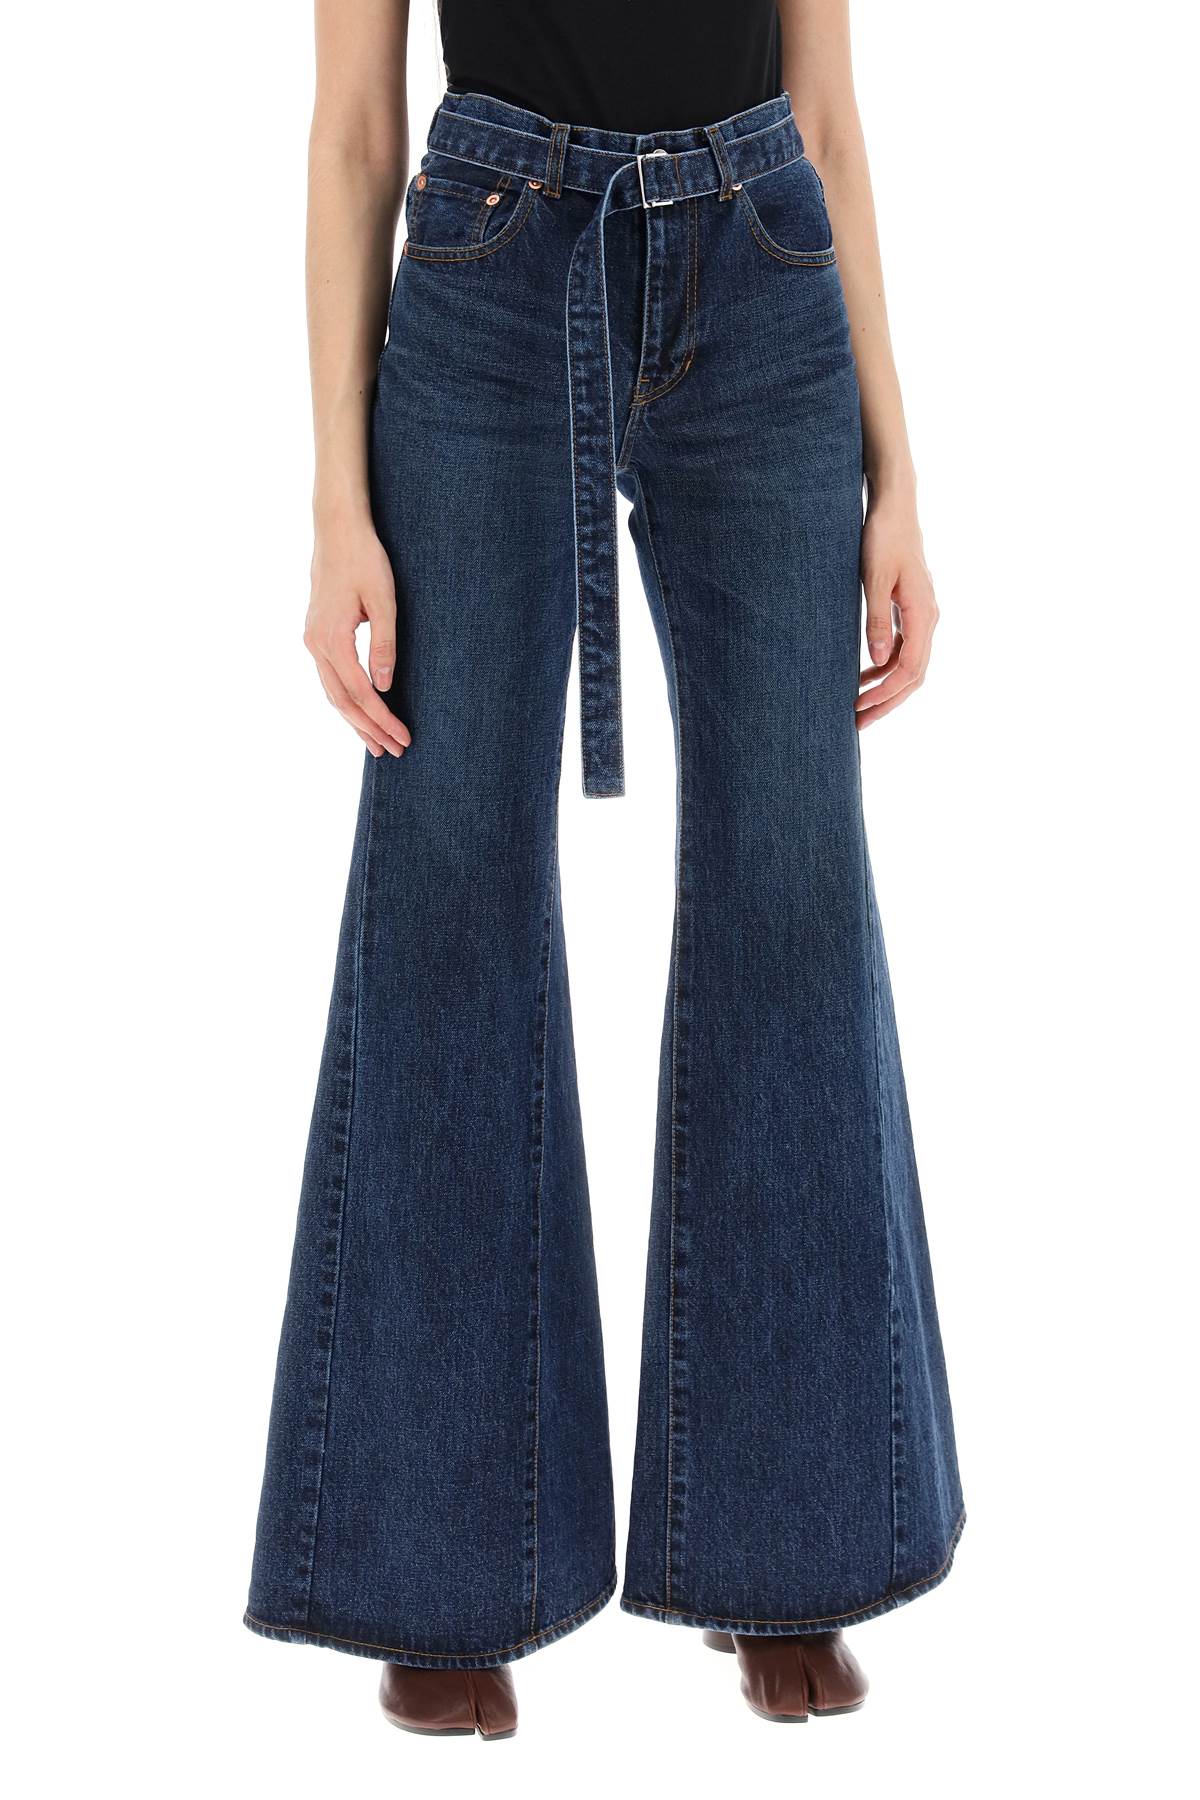 boot cut jeans with matching belt-1